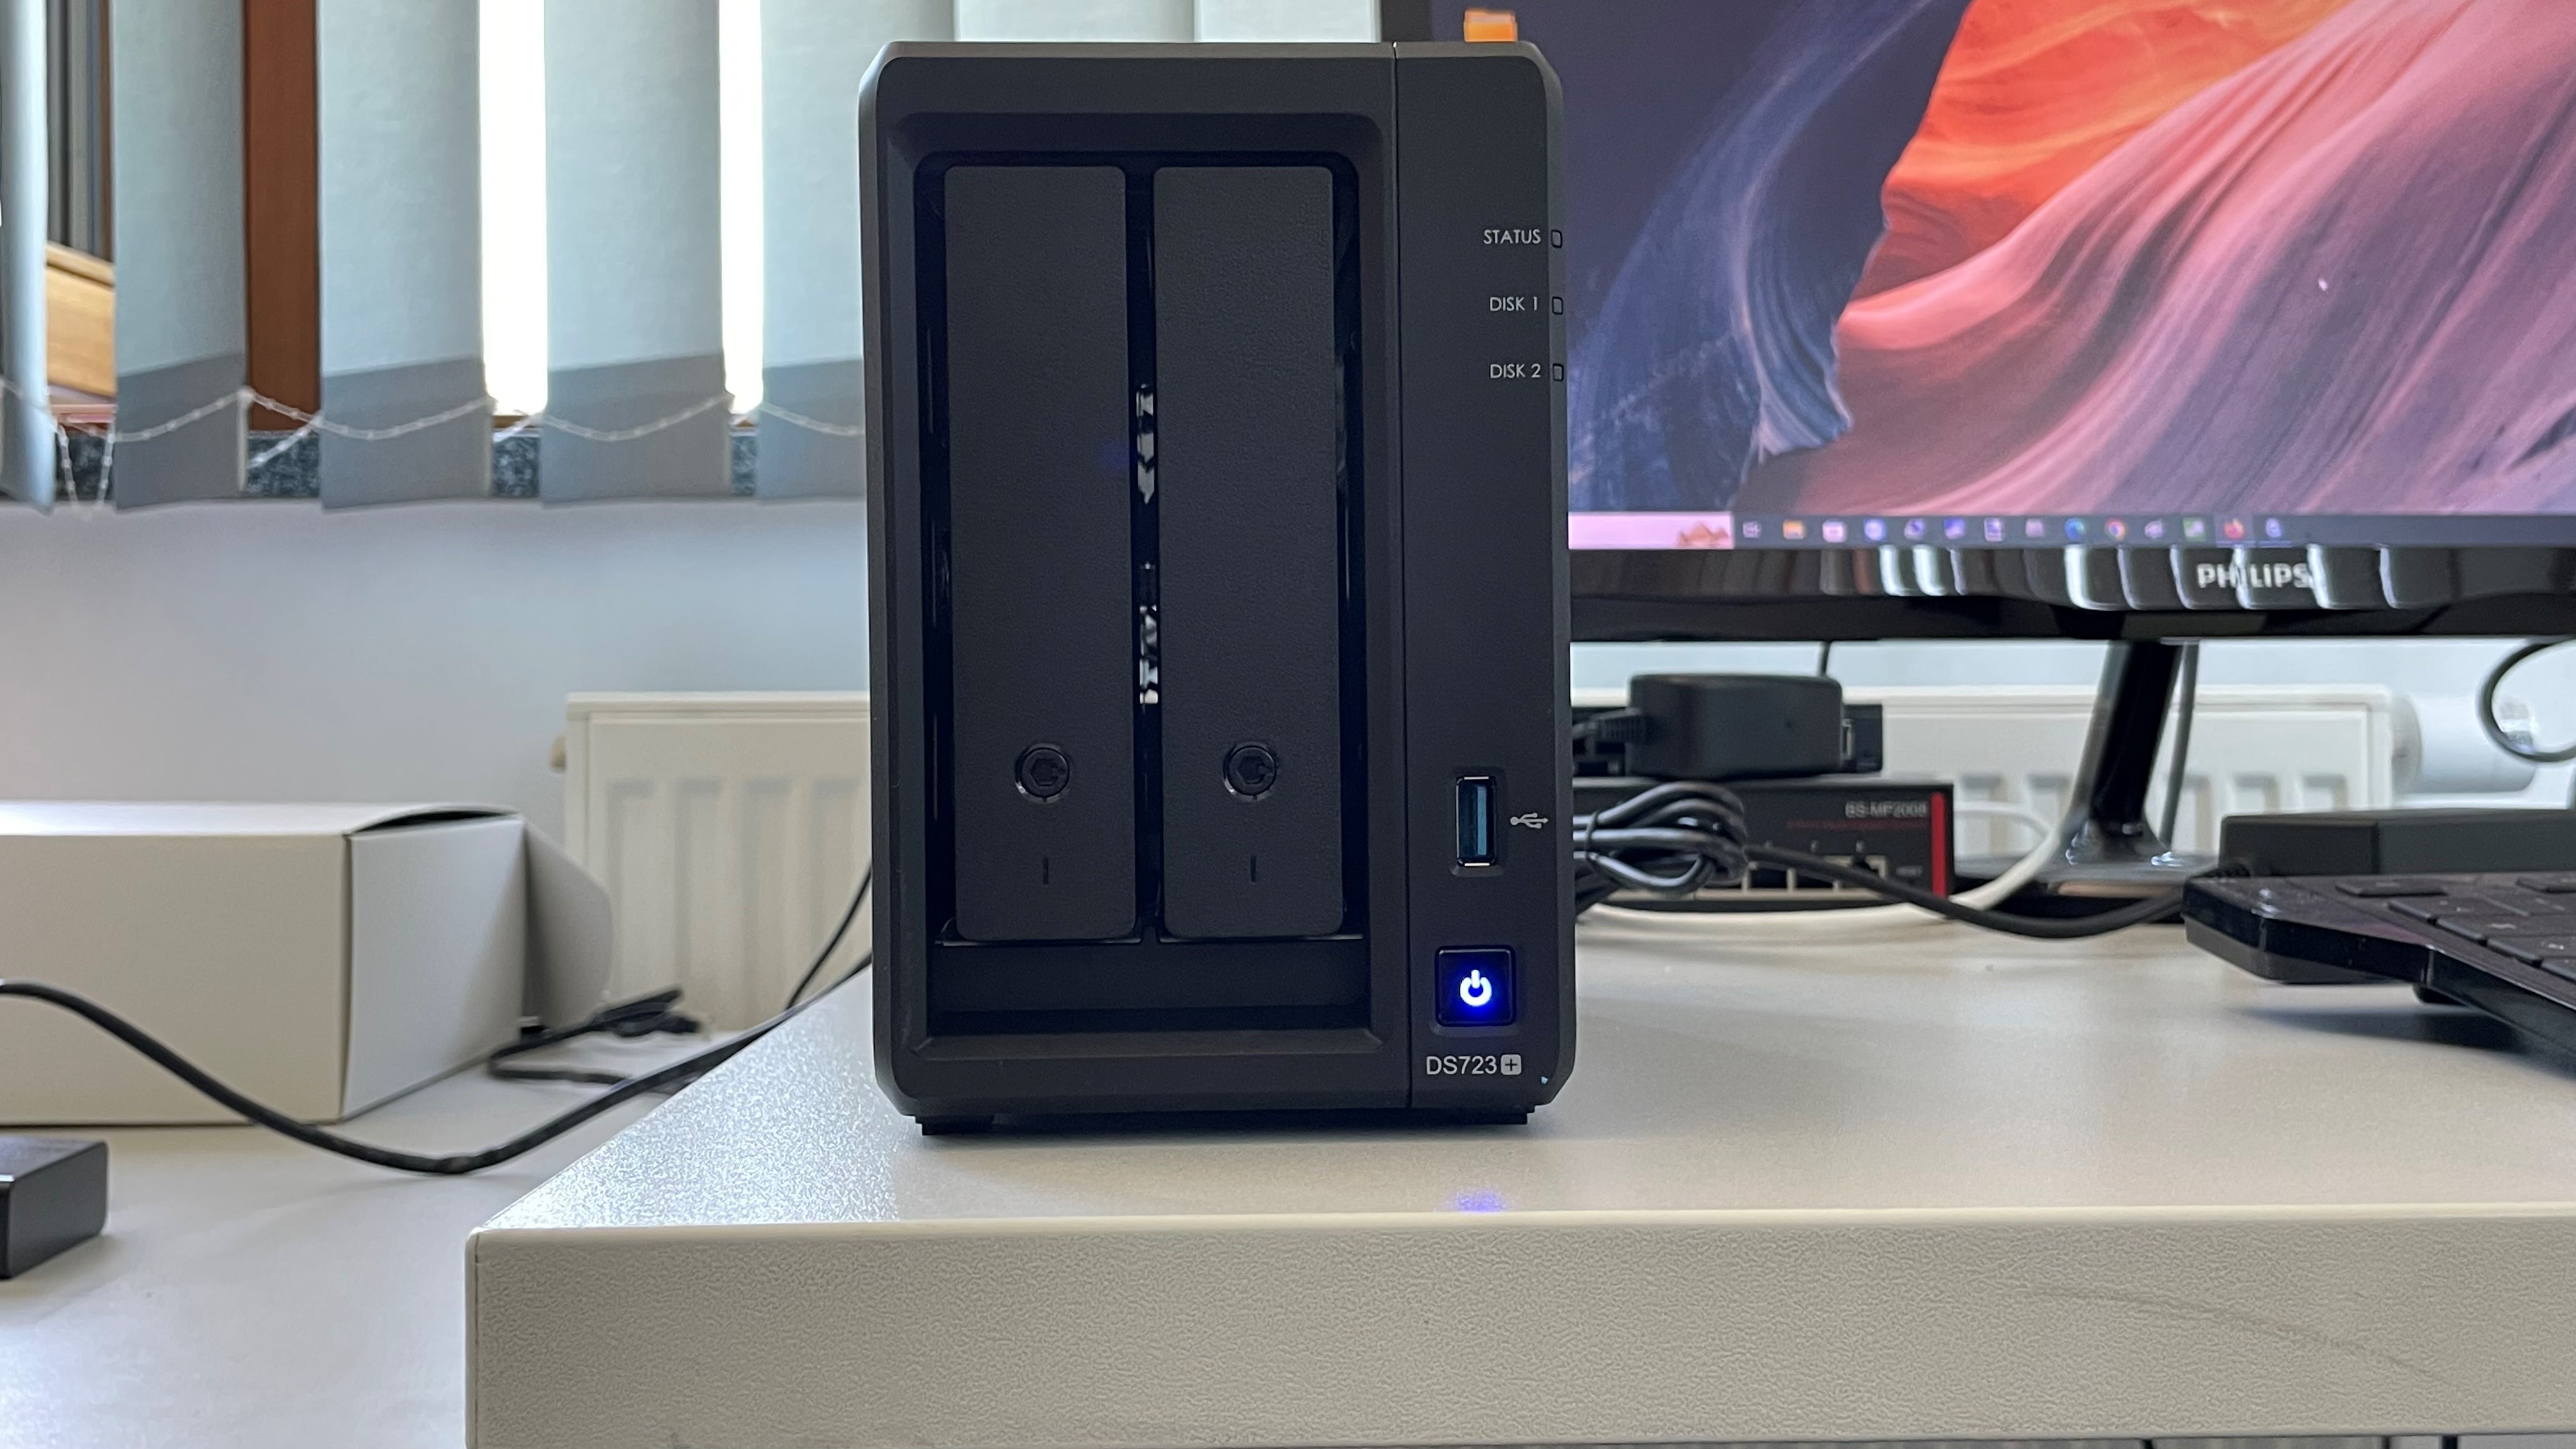 Synology DiskStation DS723+ - Most Powerful 2-bay NAS